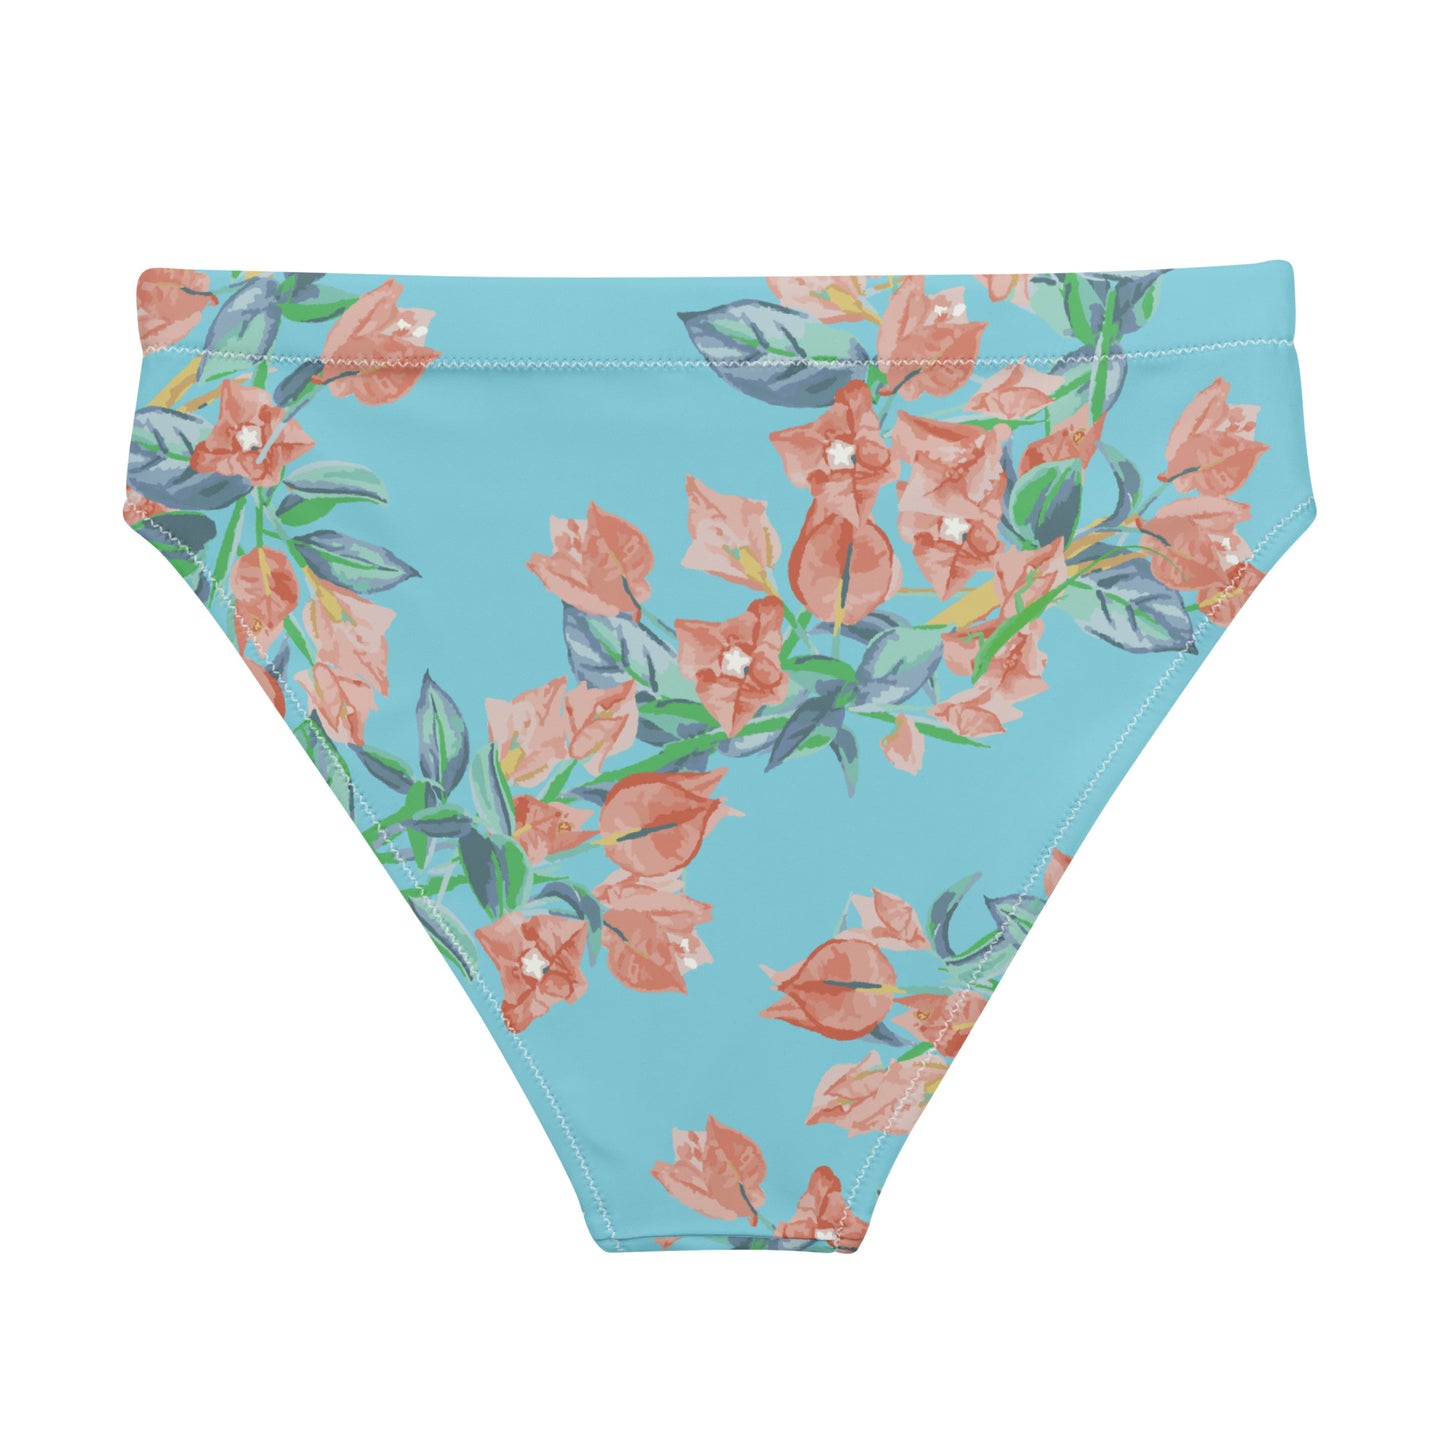 Bougainvillea Springs Sky Blue and Coral Recycled High-Waisted Bikini Bottom